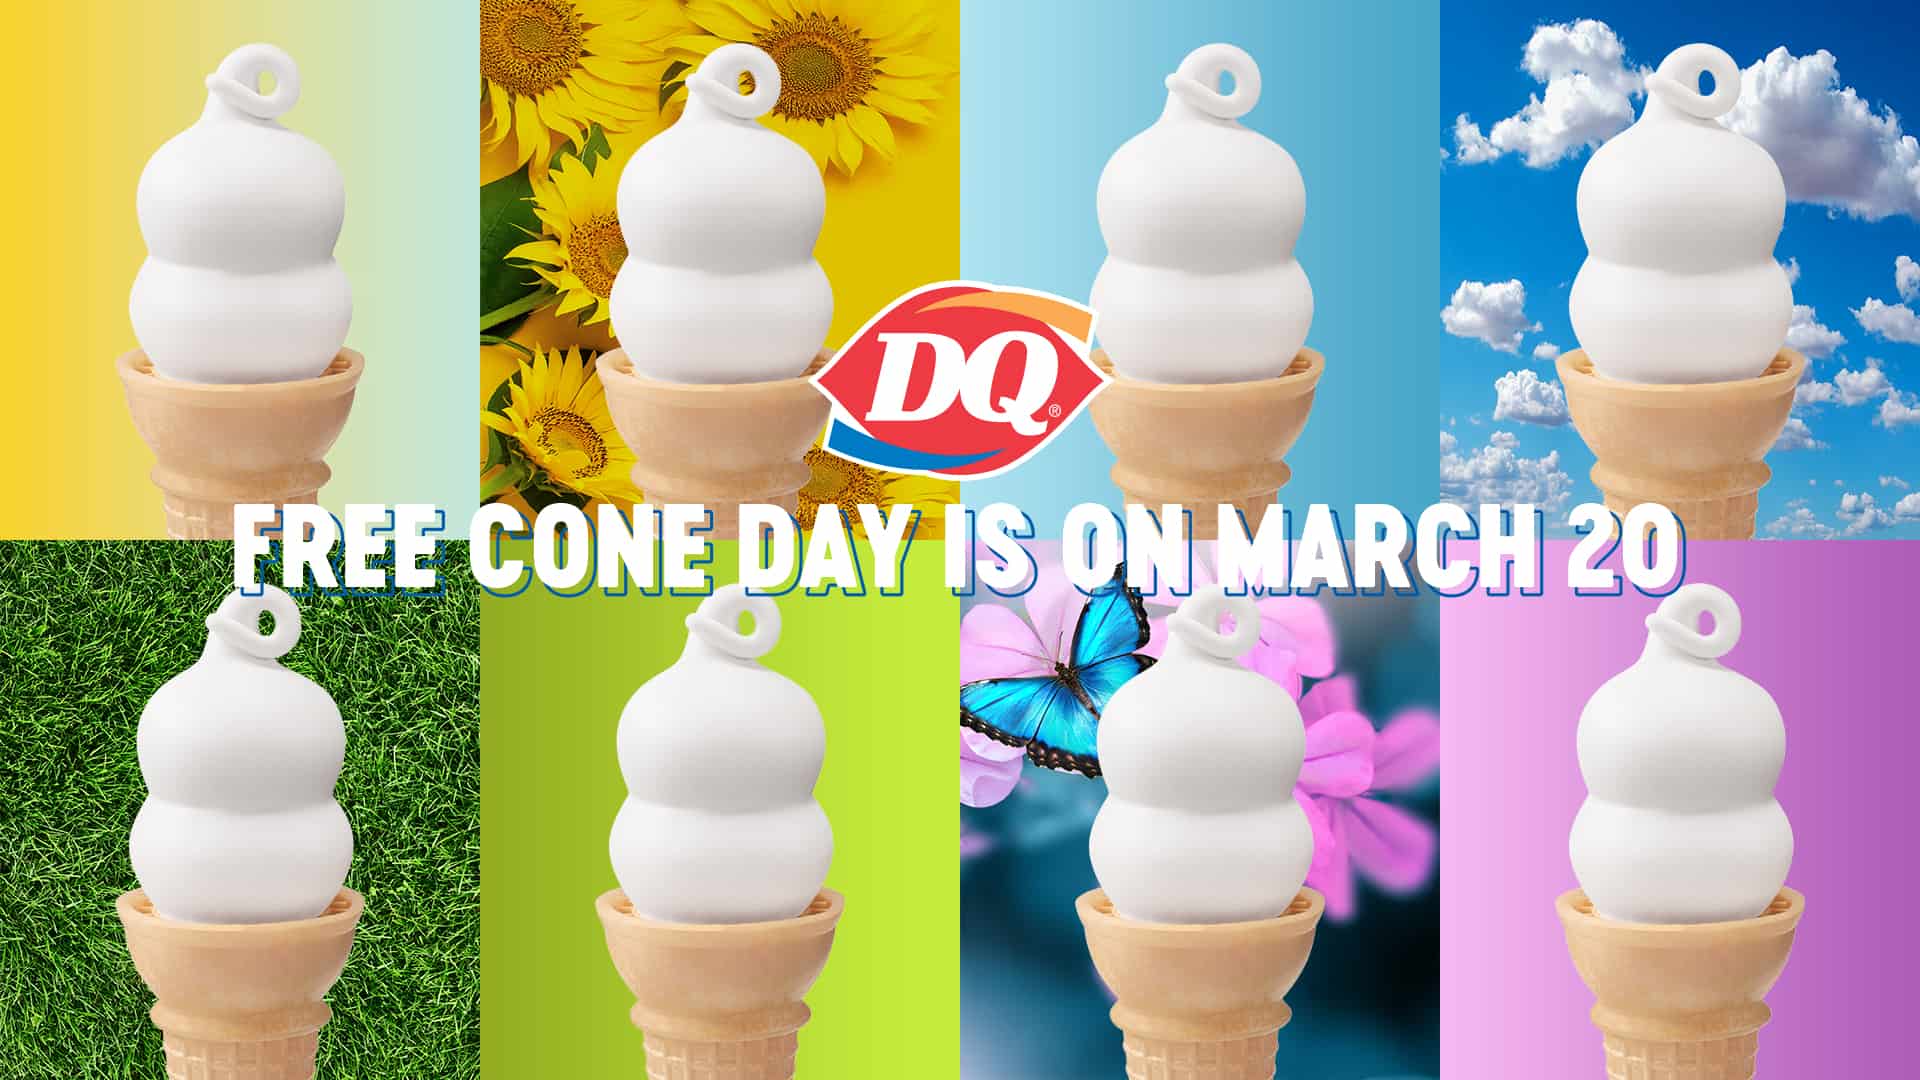 Vanilla cones from Dairy Queen against various spring-themed backgrounds.